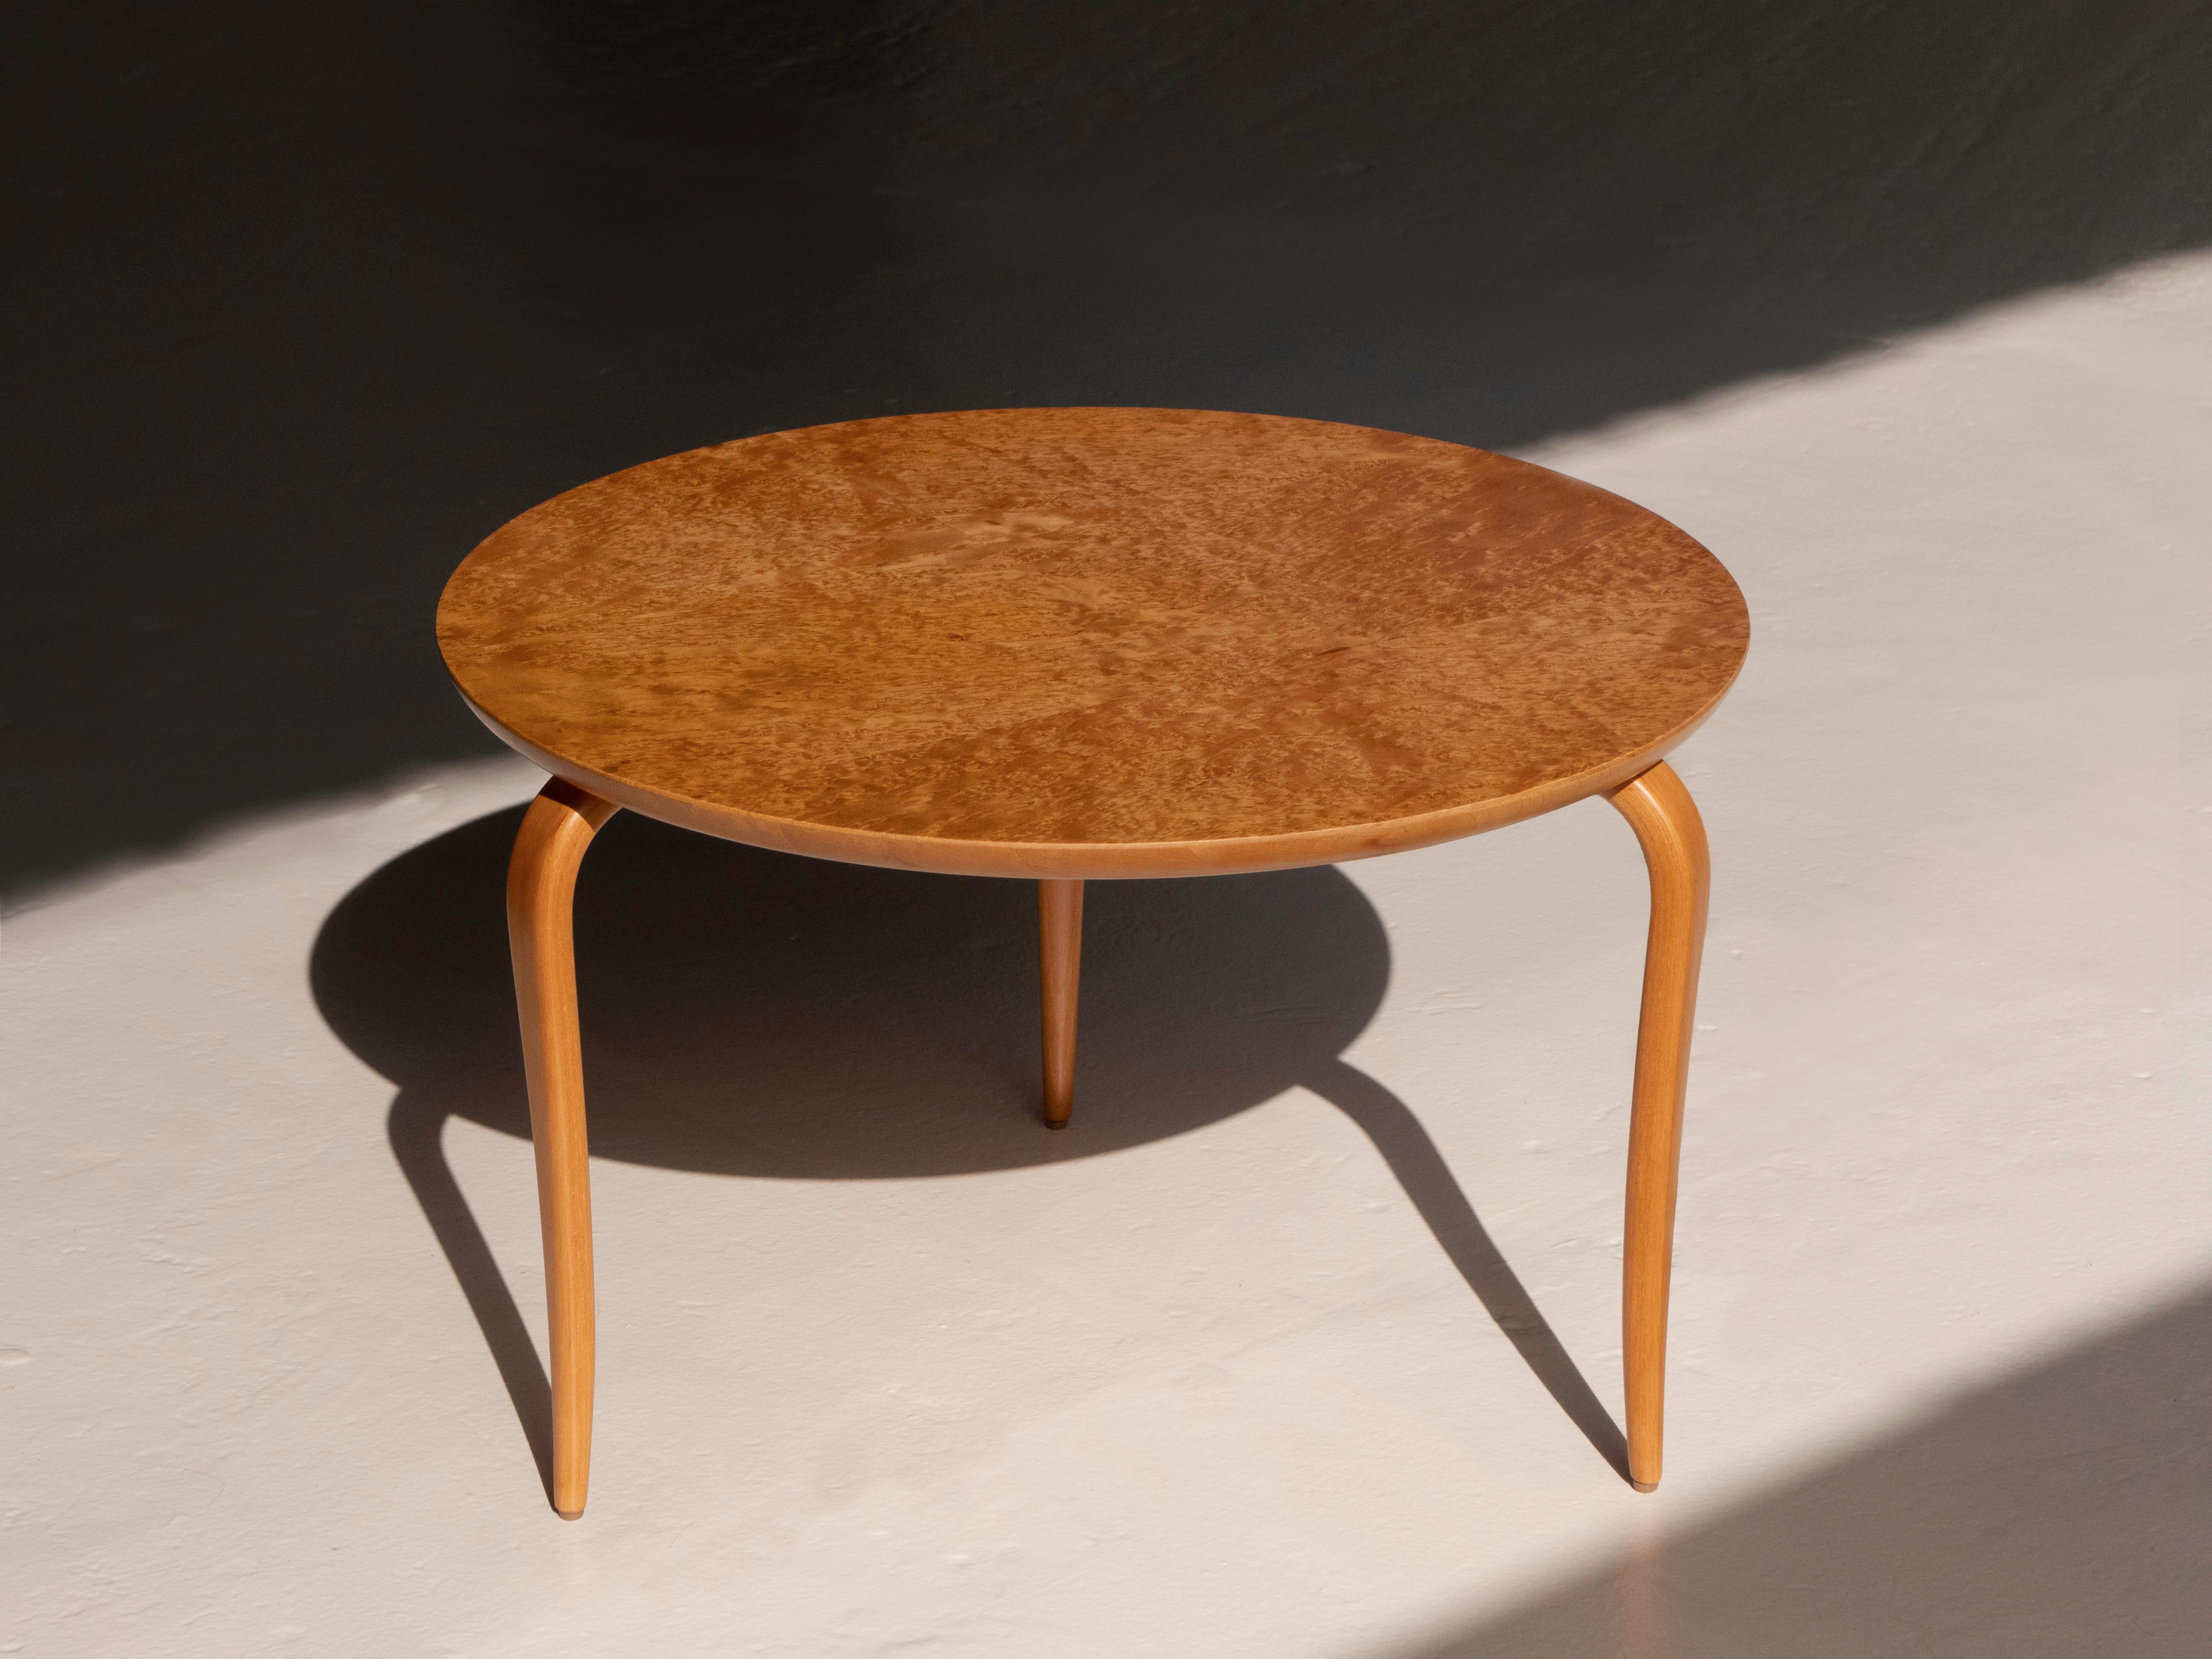 Bruno Mathsson 'Annika' cockail table / side table. It features solid birch wood tapered legs and a burlwood top. The table was manufactured by Dux, Sweden circa 1960's. The table is in excellent condition and has been refinished. It has the